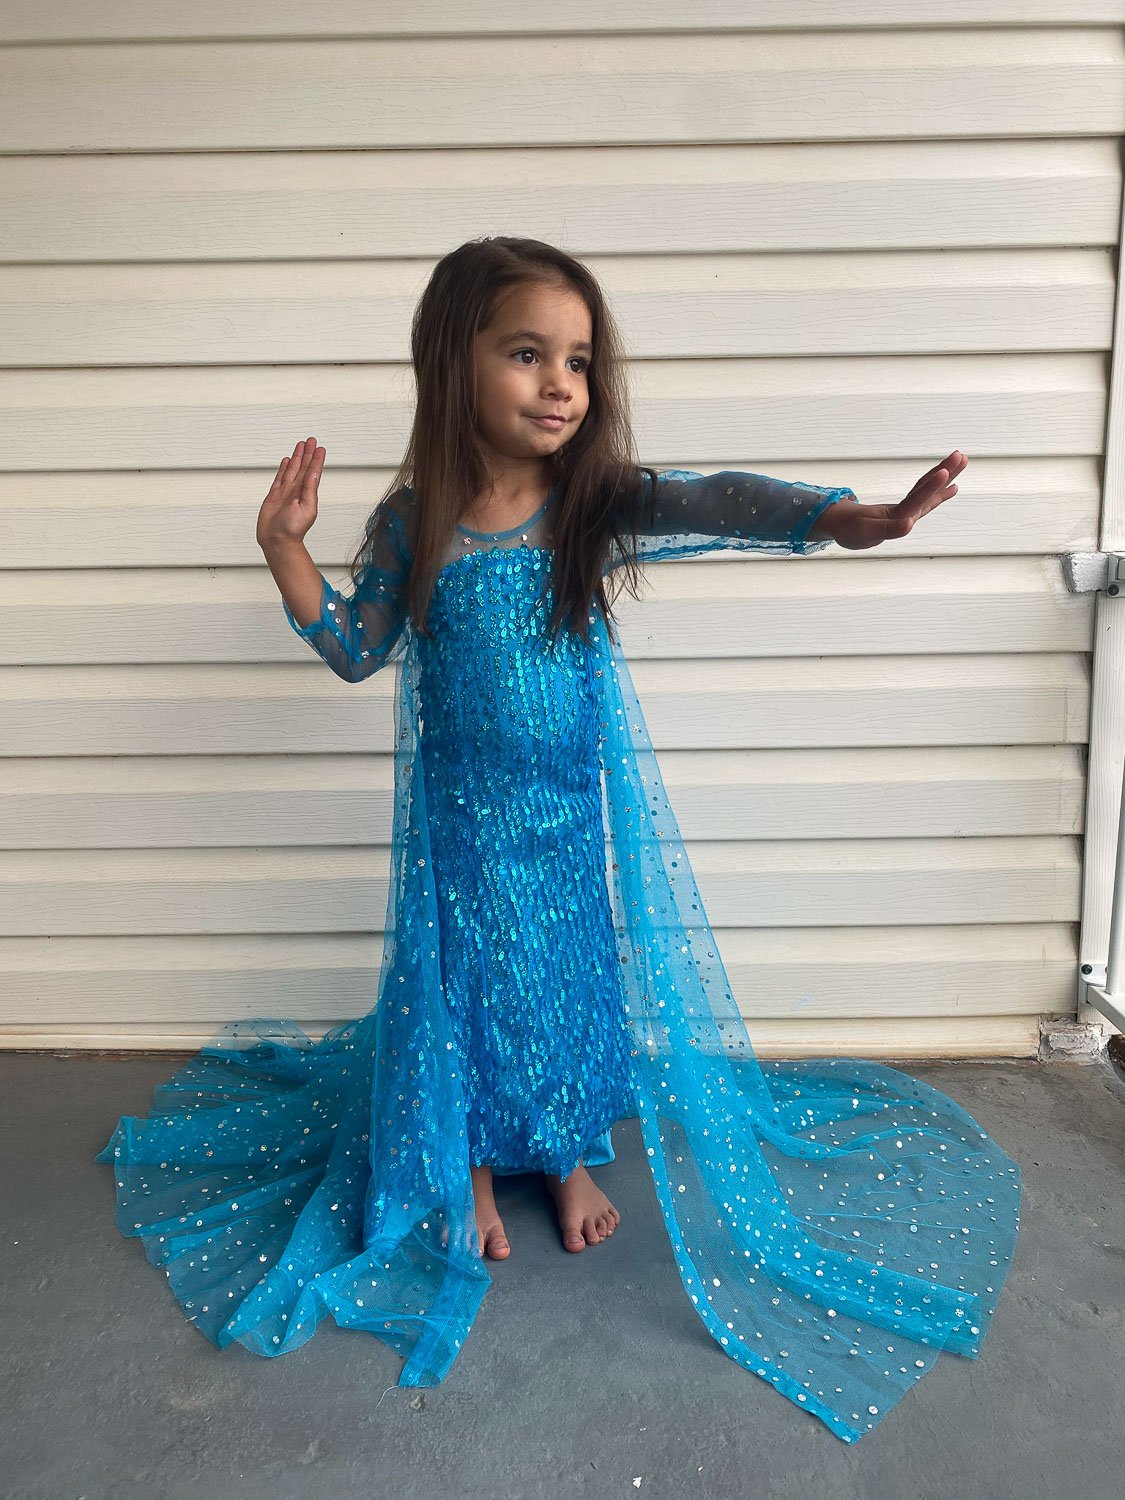 Young girl dressed as princess from the movie Frozen